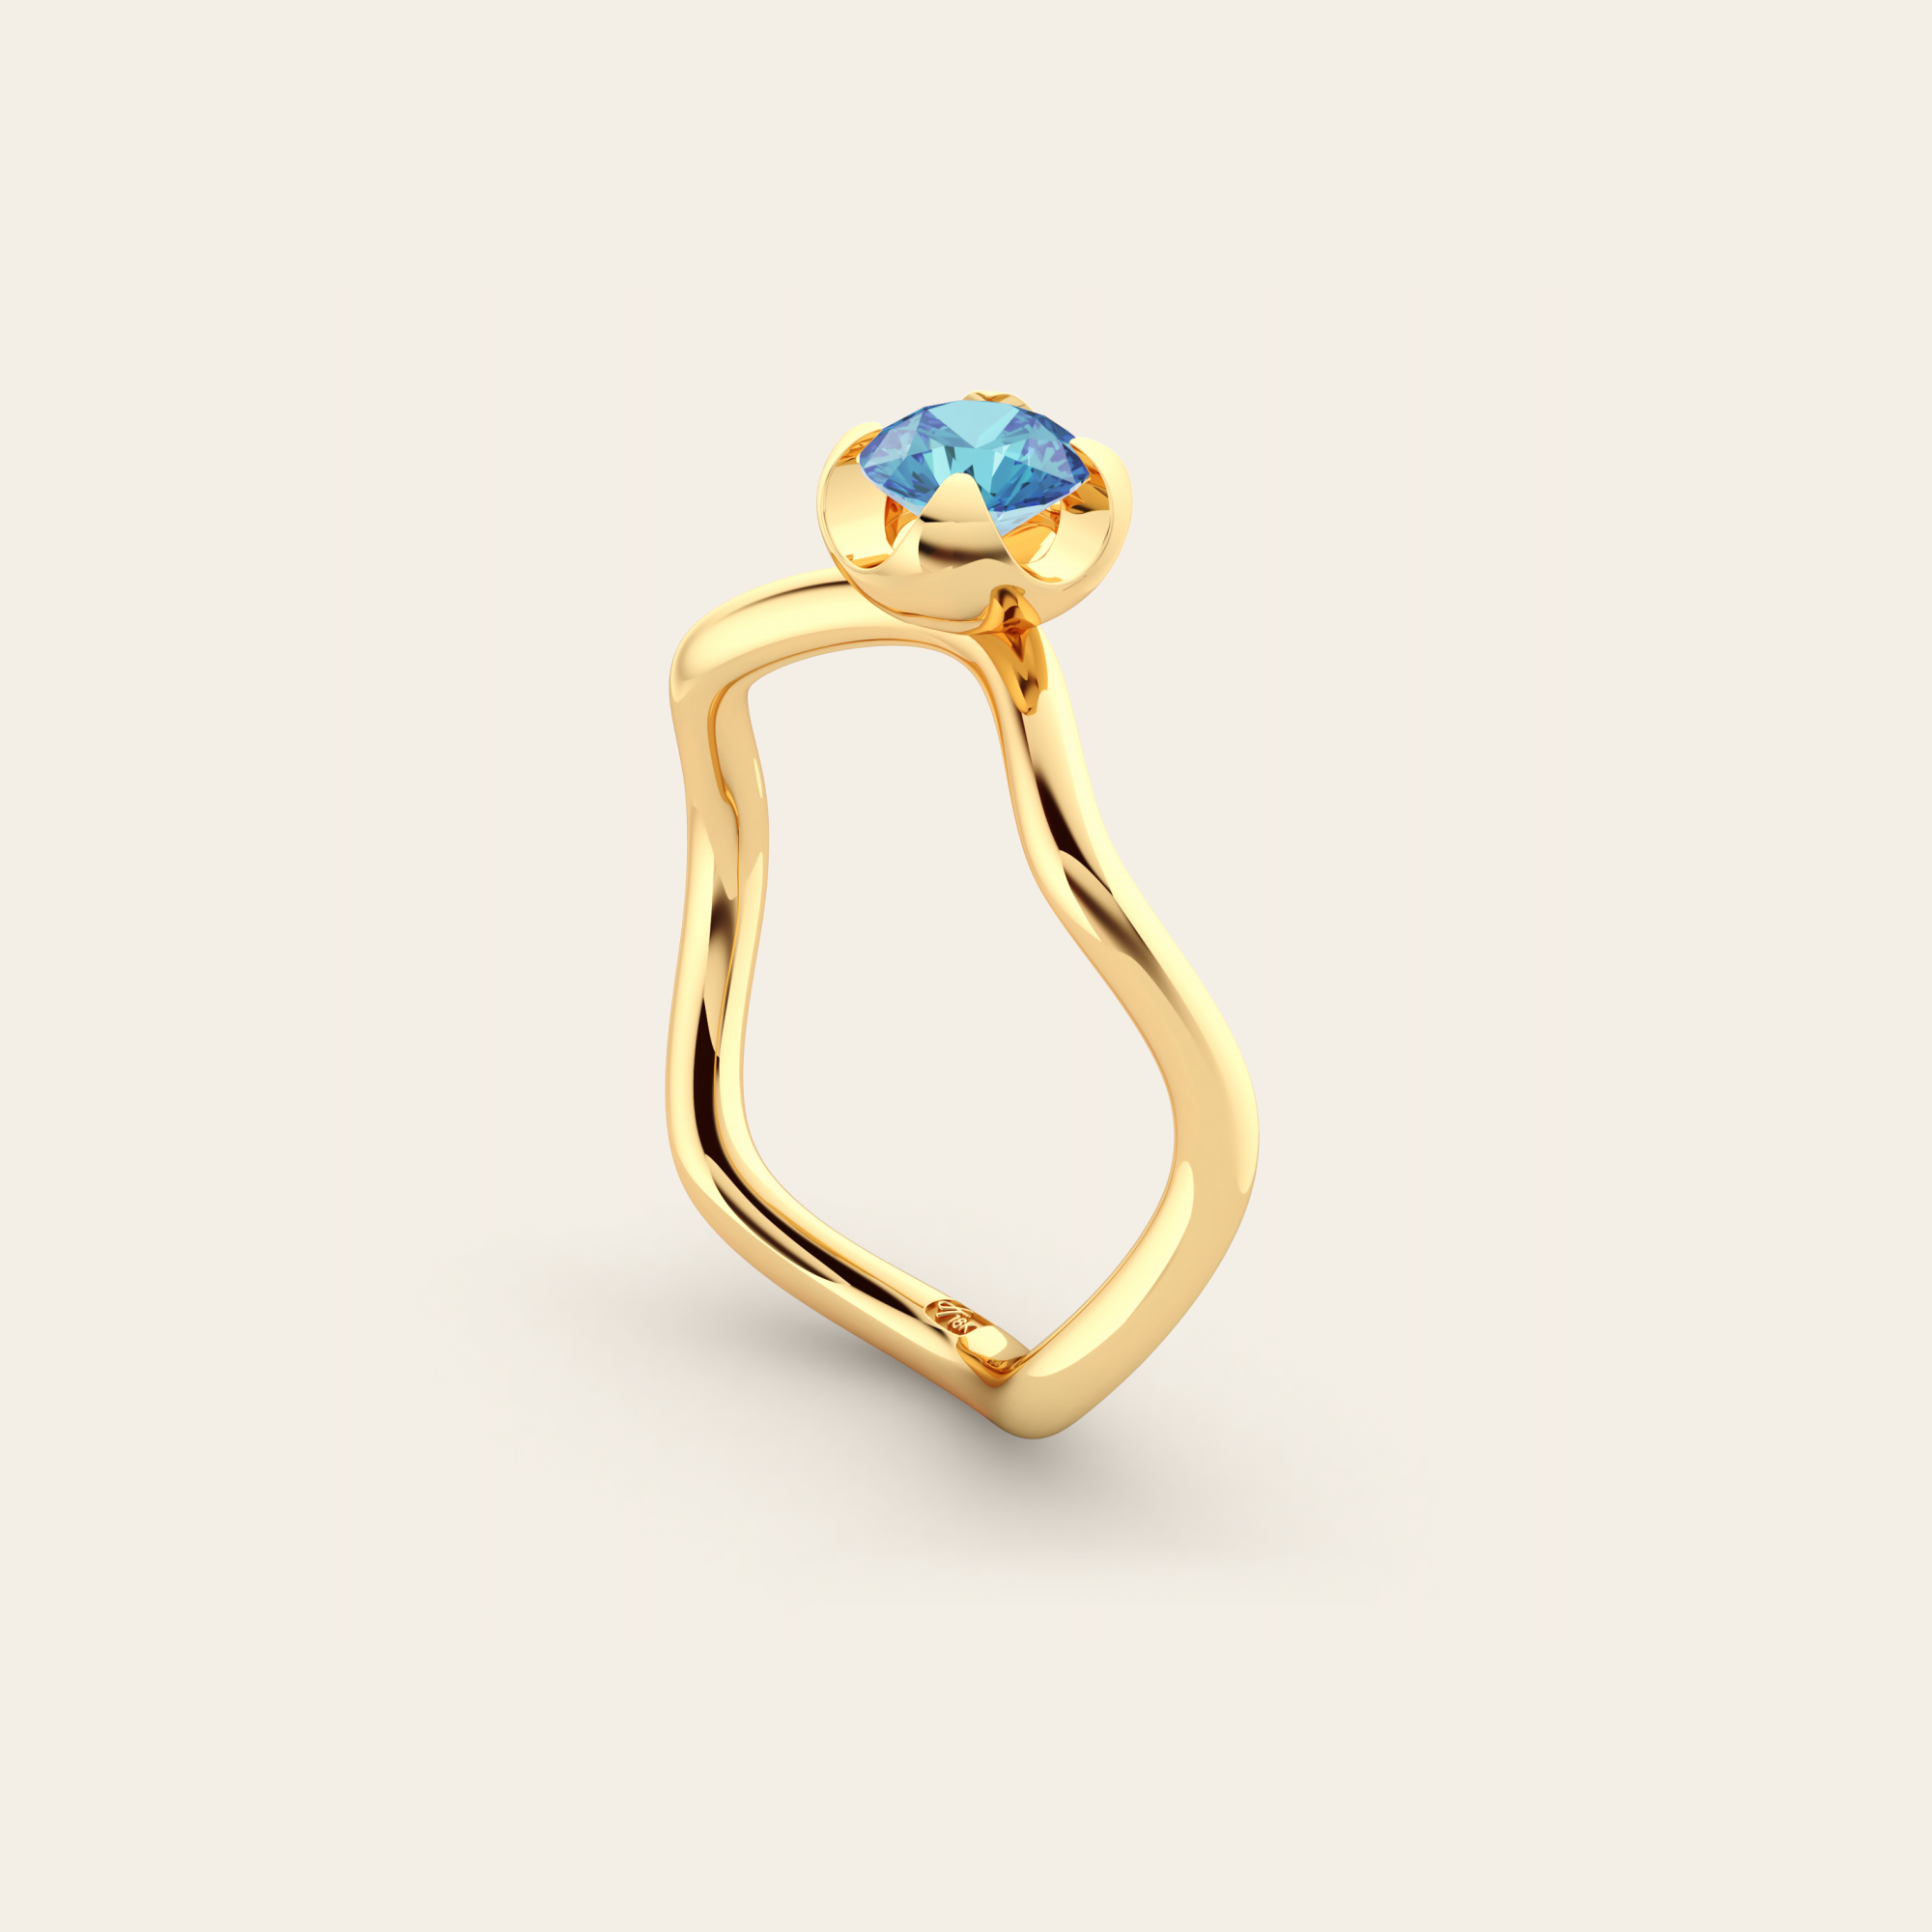 The Curve Ring with Blue Zircon in 18k Yellow Gold